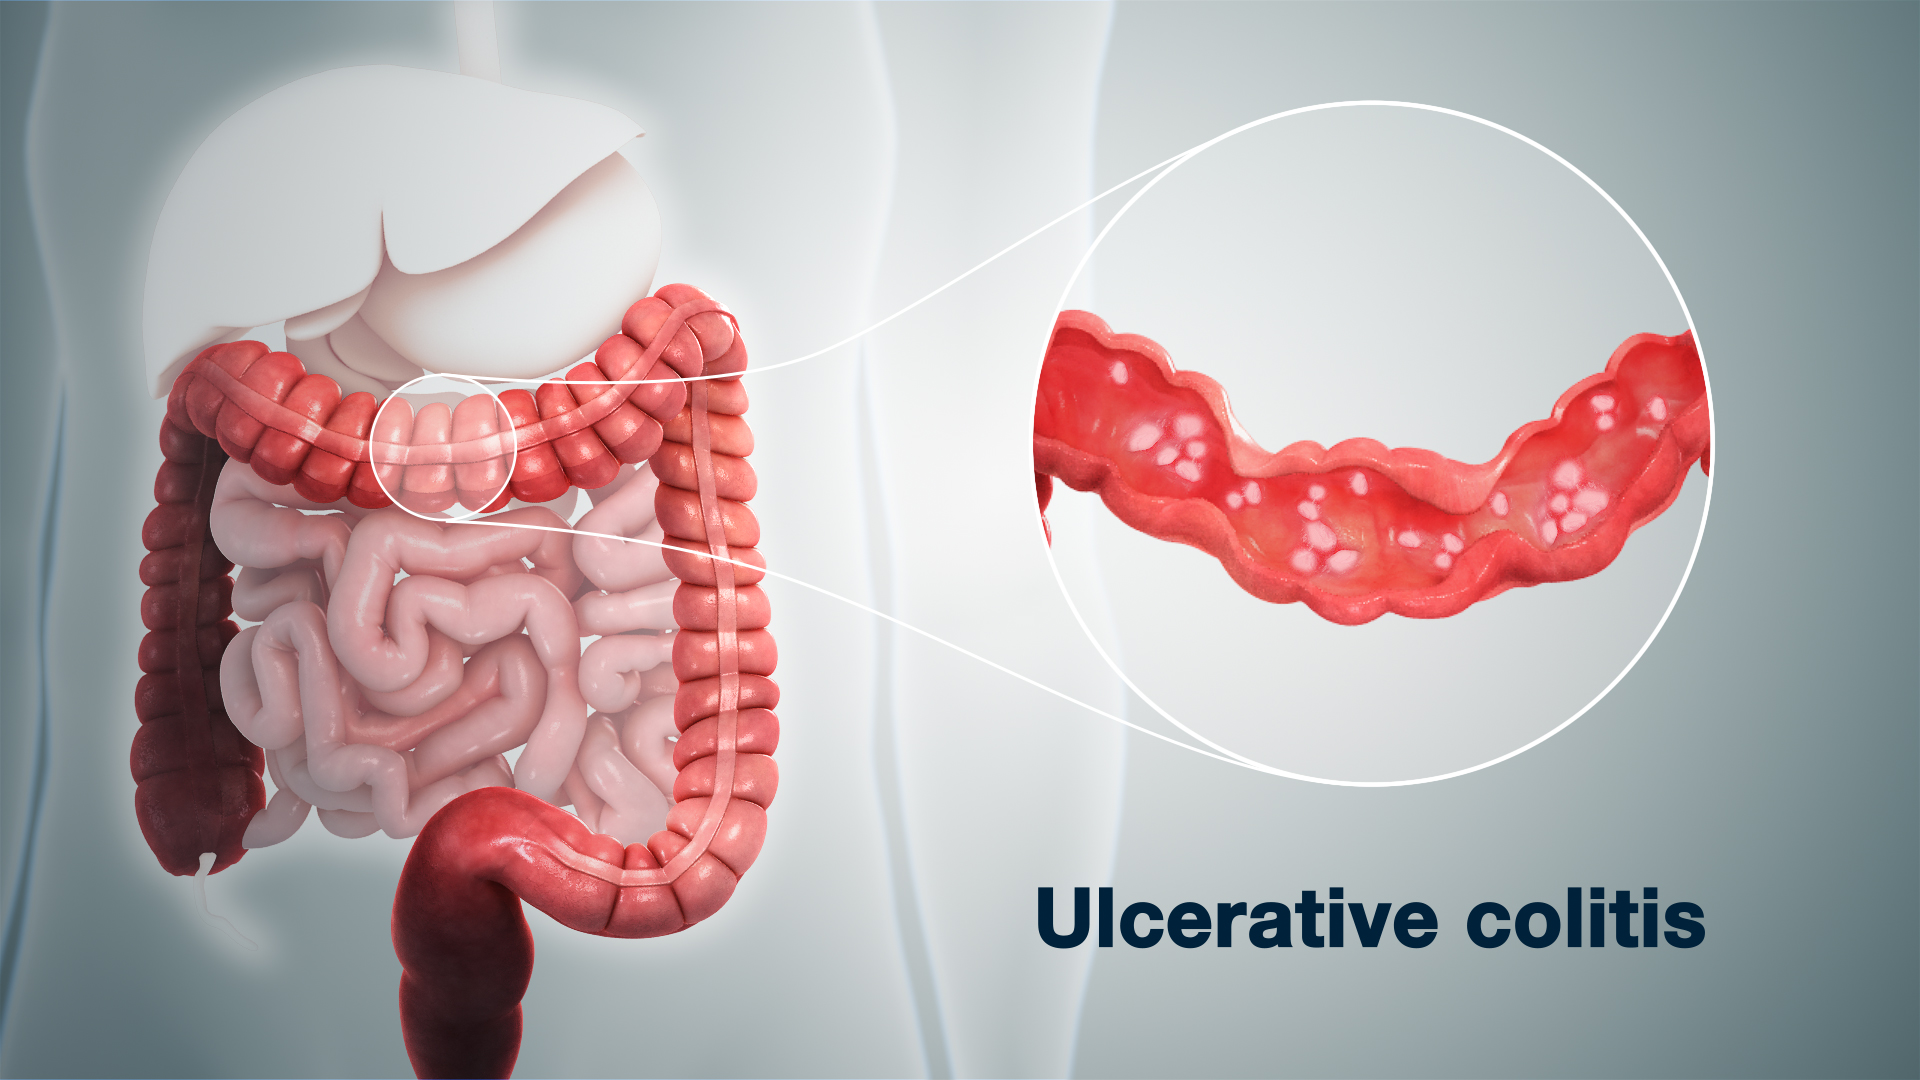 https://www.scientificanimations.com/wp-content/uploads/2020/01/3D-medical-animation-of-Ulcerative-Colitis.jpg